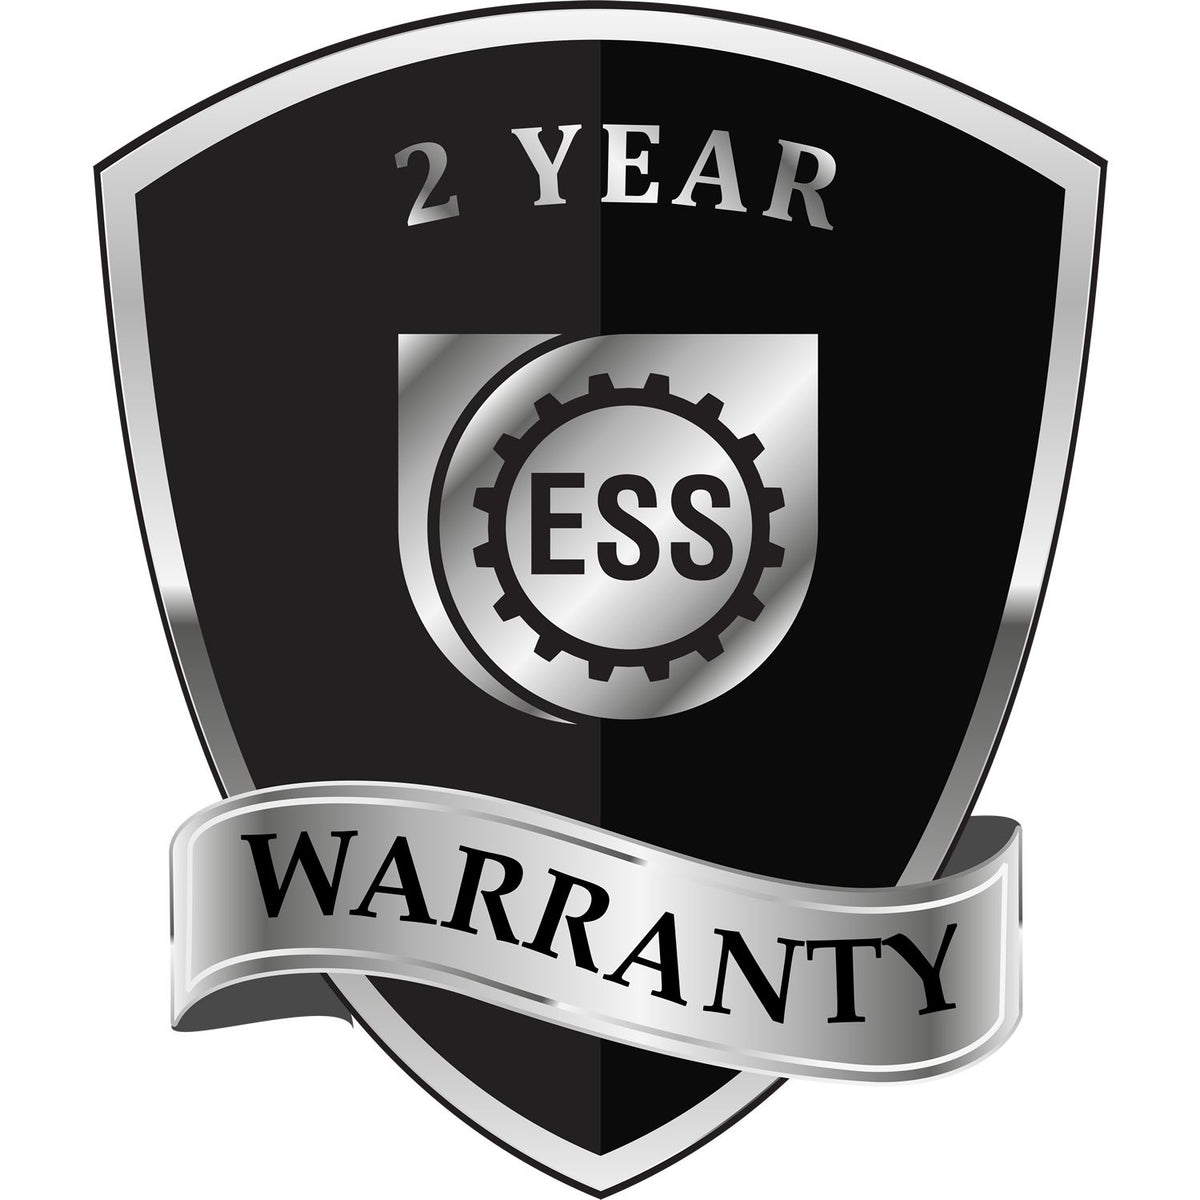 A badge or emblem showing a warranty icon for the State of South Carolina Extended Long Reach Engineer Seal